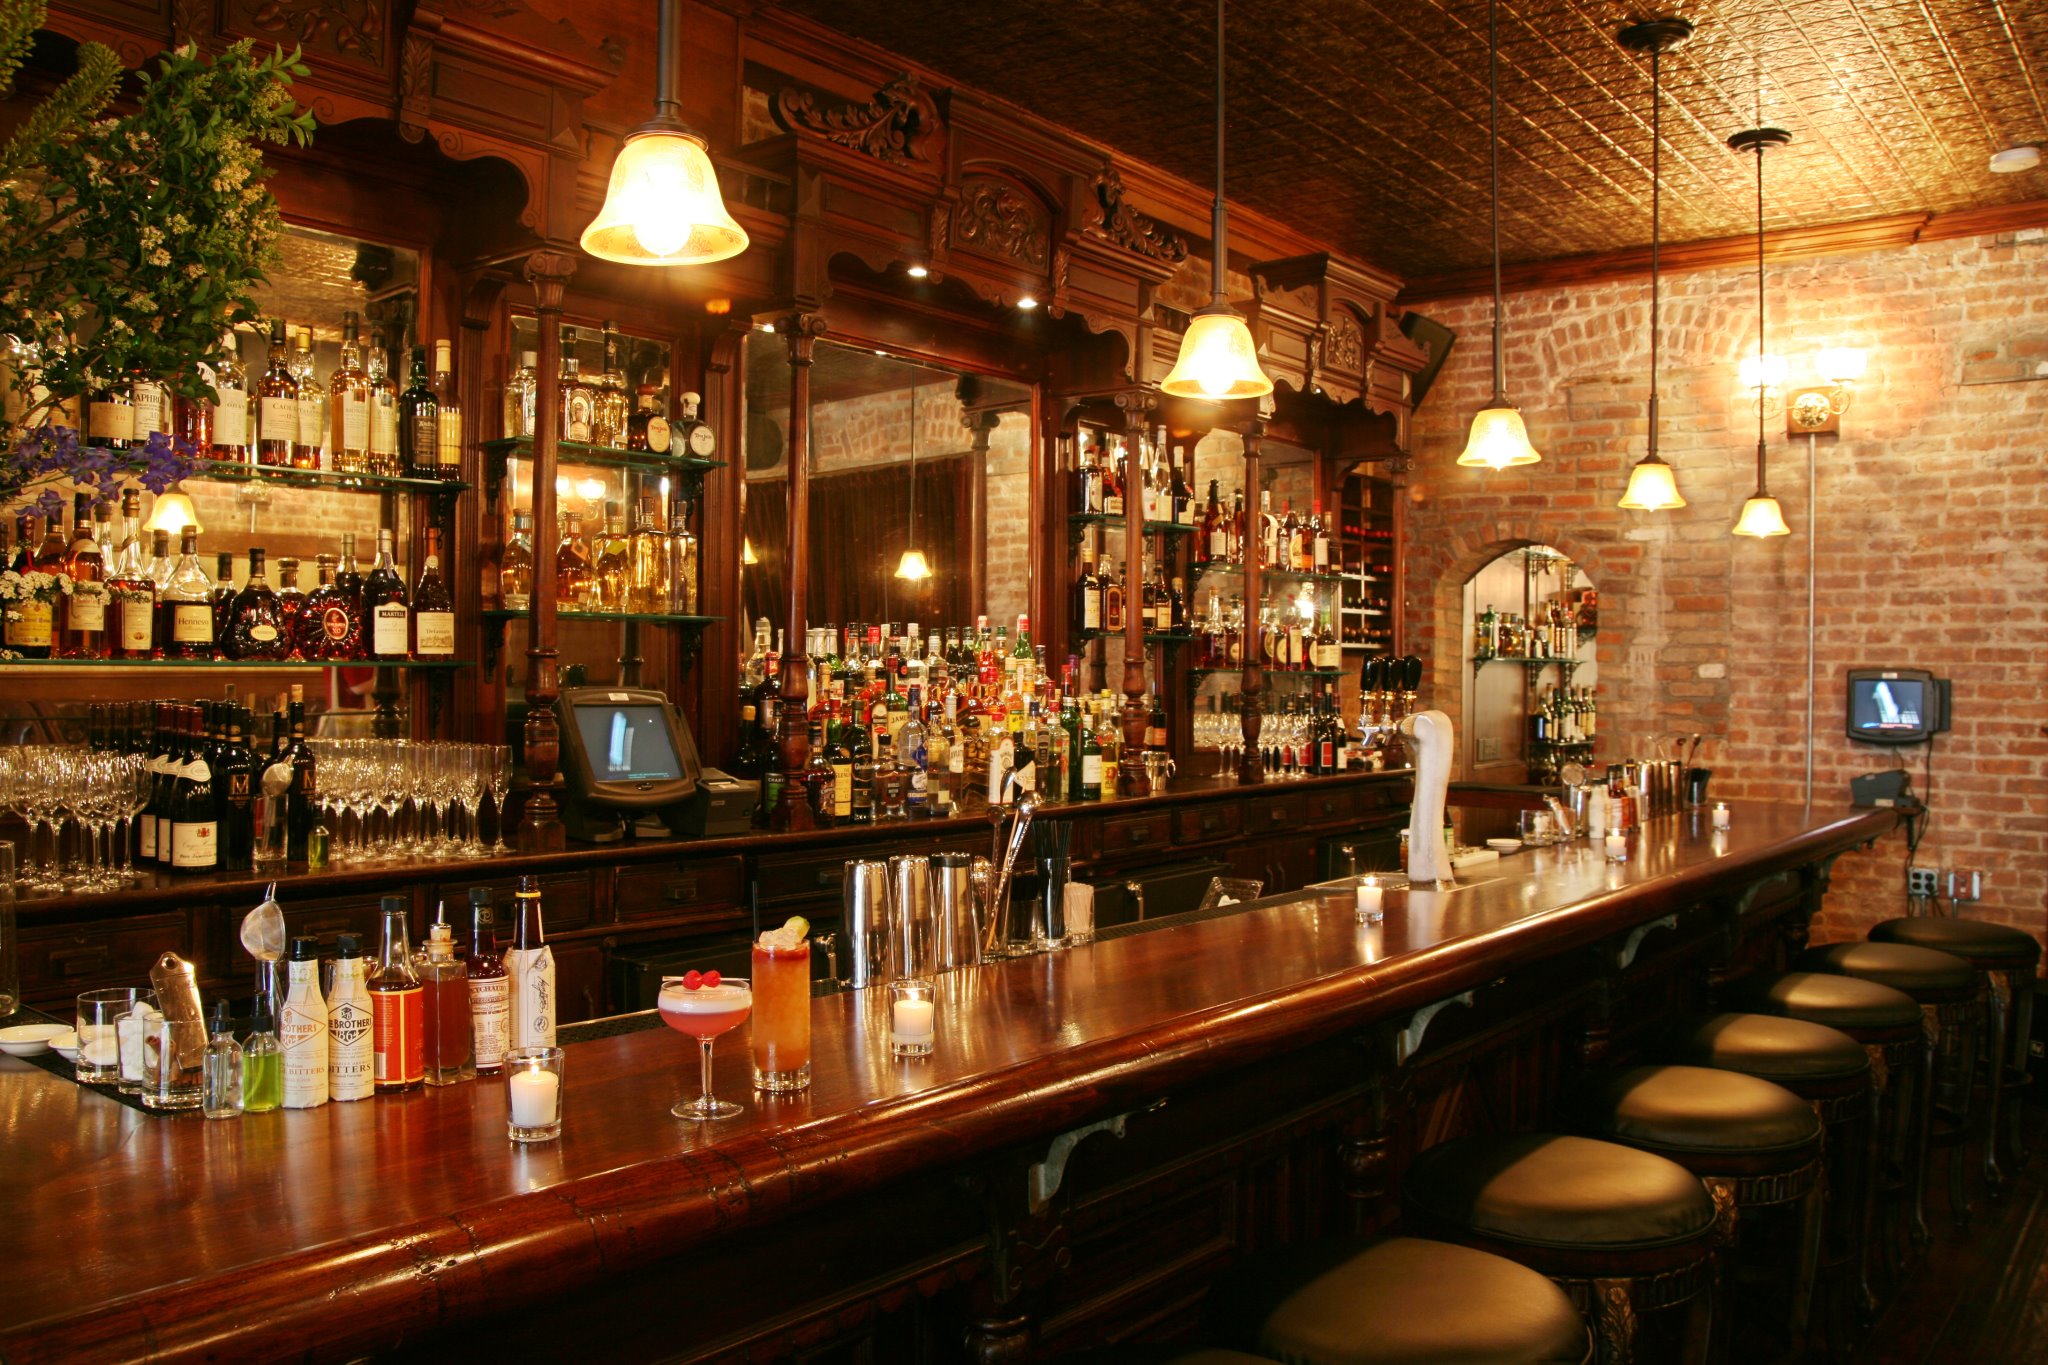 The interior of Clover Club New York, named after the Clover Club recipe